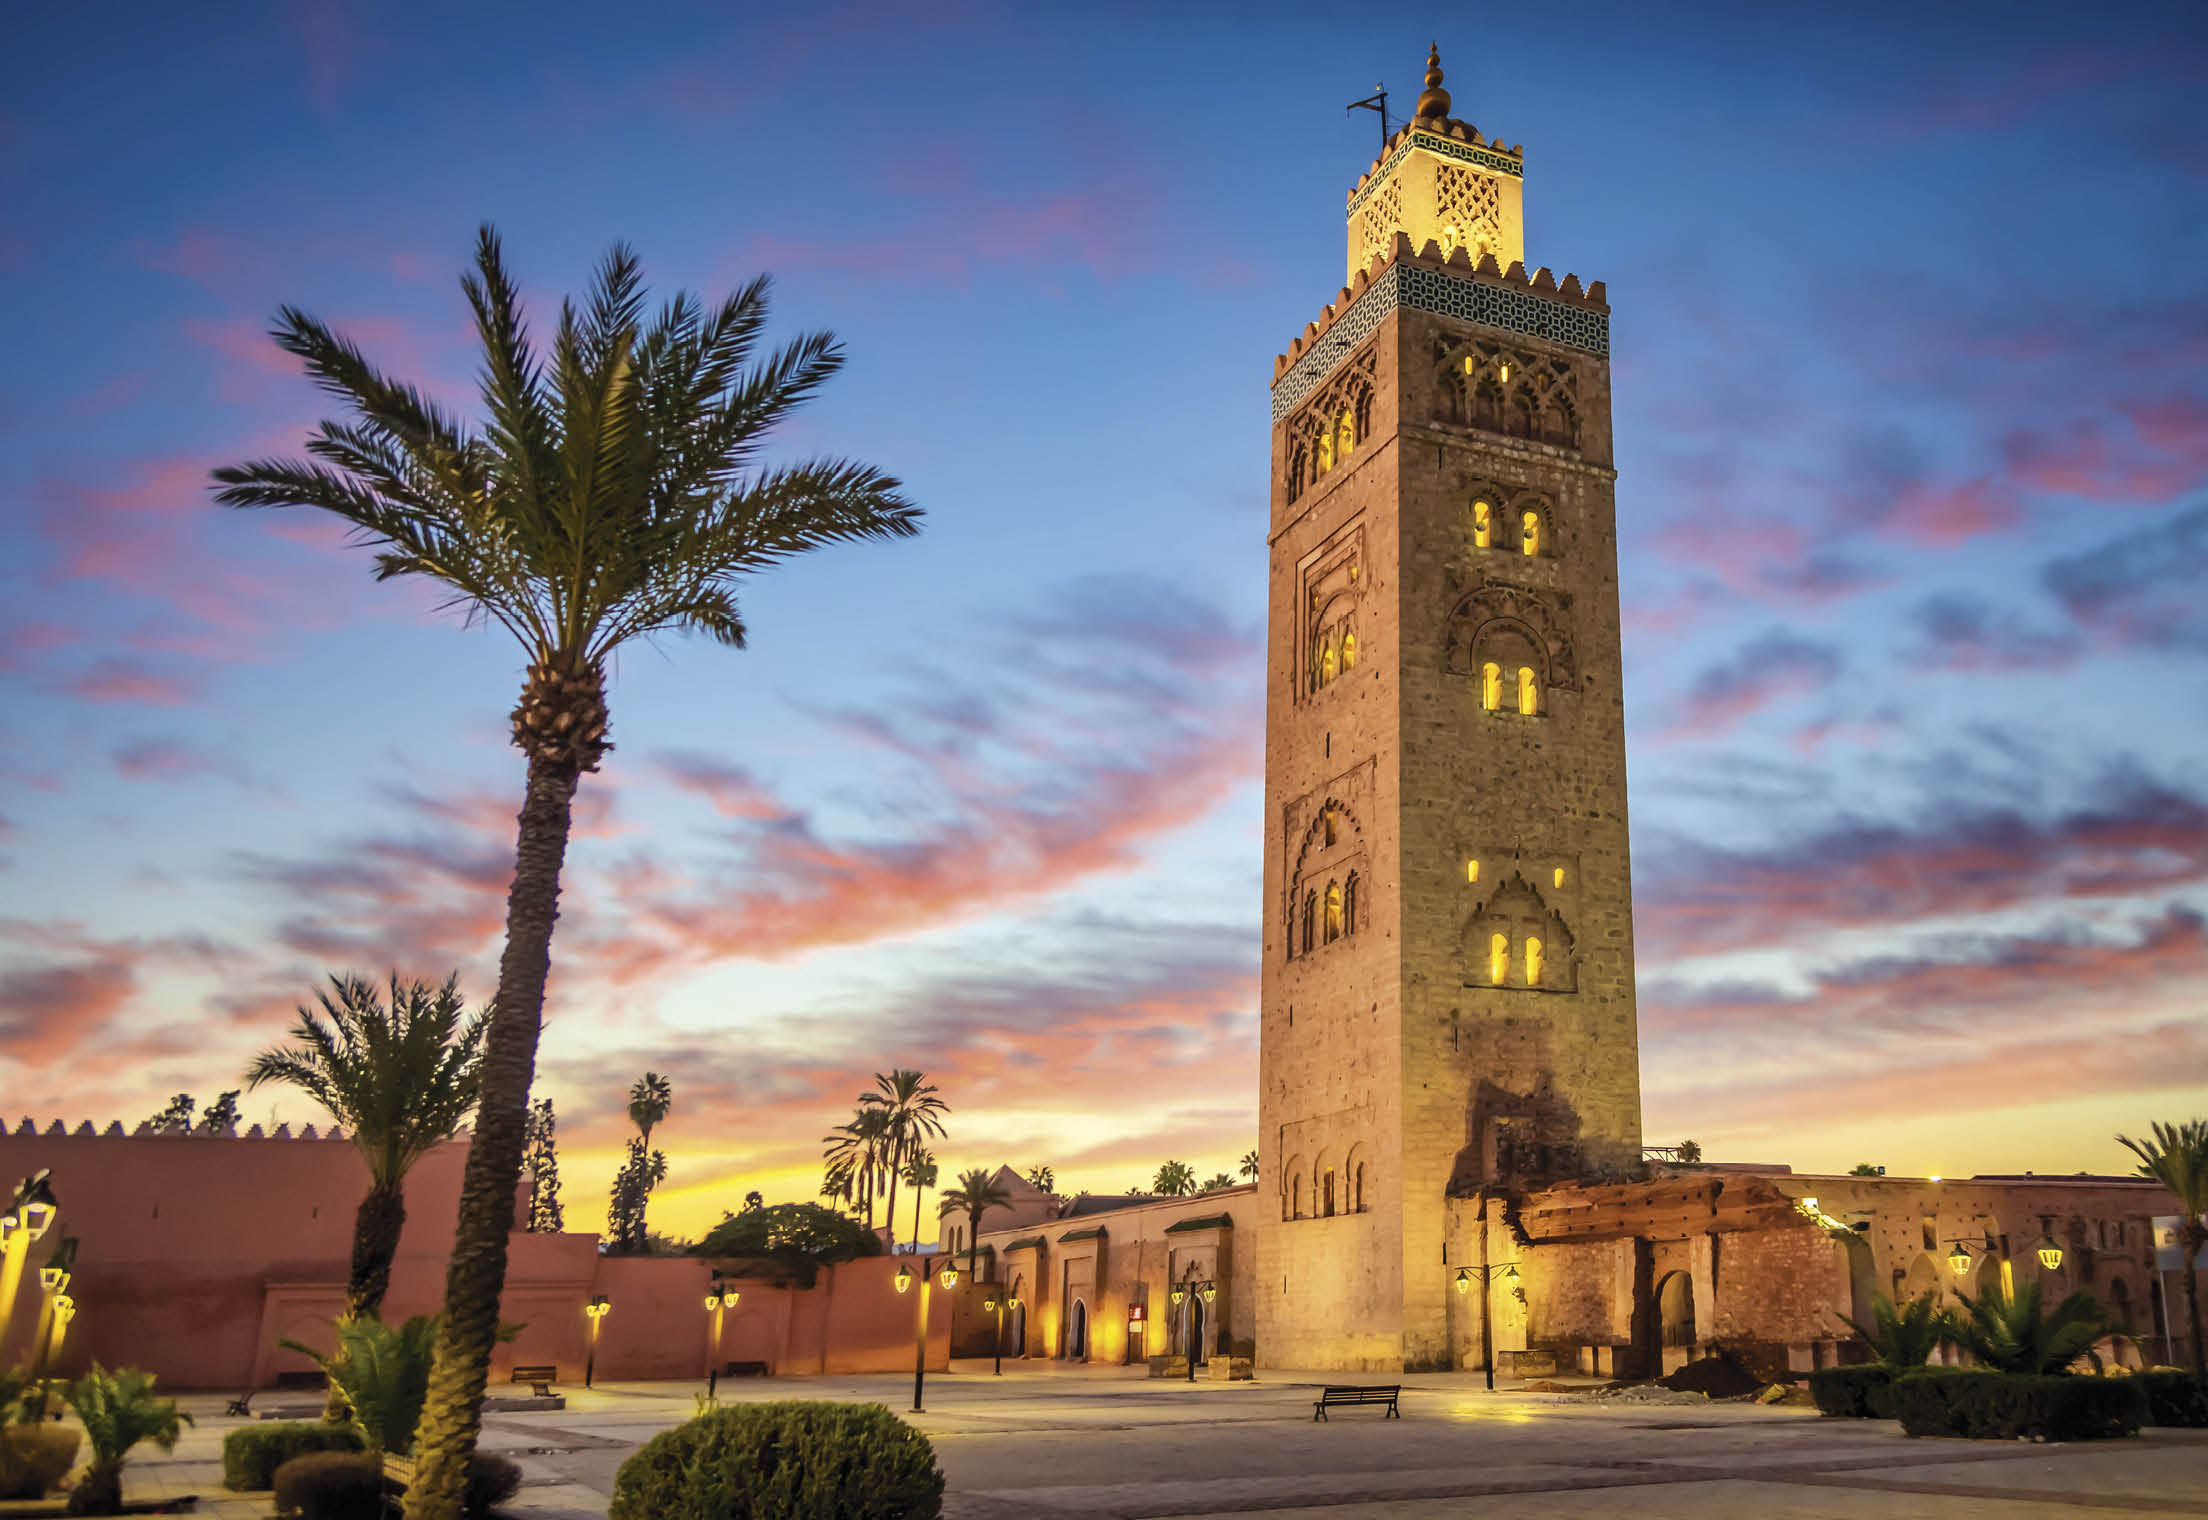 Koutoubia mosque in the morning surrounded by palm tree, Marrakesh, Morocco